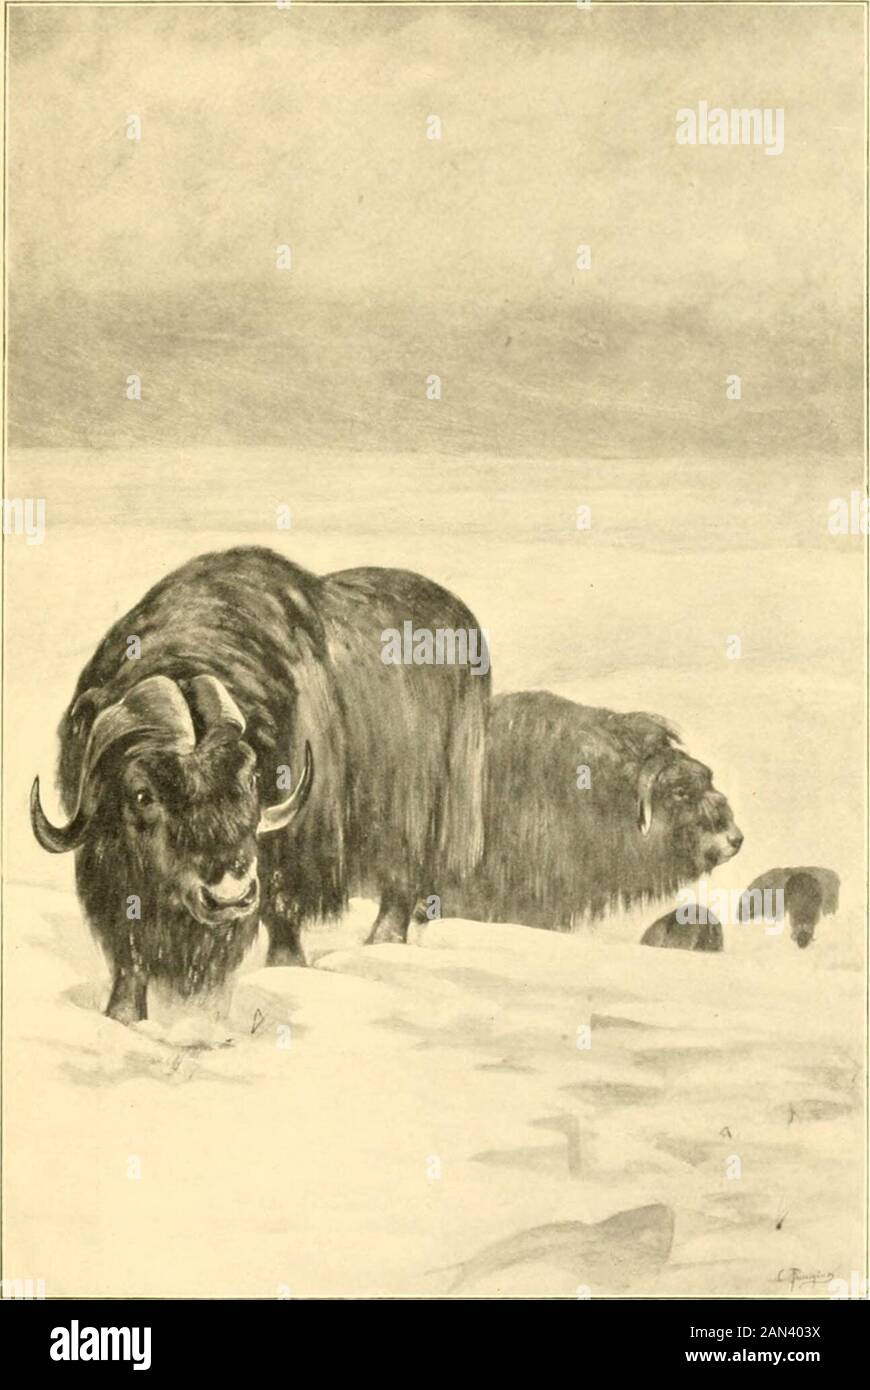 Musk-ox, bison, sheep and goat . r North .... At Bay 3° Outnumbered 45 East Greenland Musk-ox Calf 57 Head of Two-year-old Musk-ox Bull .... 57Musk-oxen on Cape Morris Jesup, brought to Bay BY Dogs 65 The Authors Barren Ground Hunting Knife and Ax 67 The Barren Ground Musk-ox—a Full-grown Bull . 71 Forefoot of Barren Ground Musk-ox .... 76 Full-grown East Greenland Musk-ox — Adult Male 77 Forefoot of East Greenland Musk-ox .... 79 Skull of the East Greenland Musk-ox — Front View 82 Skull of the Barren Ground Musk-ox — Front View 82 Skull of the East Greenland Musk-ox — Side View . 83 Skull of Stock Photo